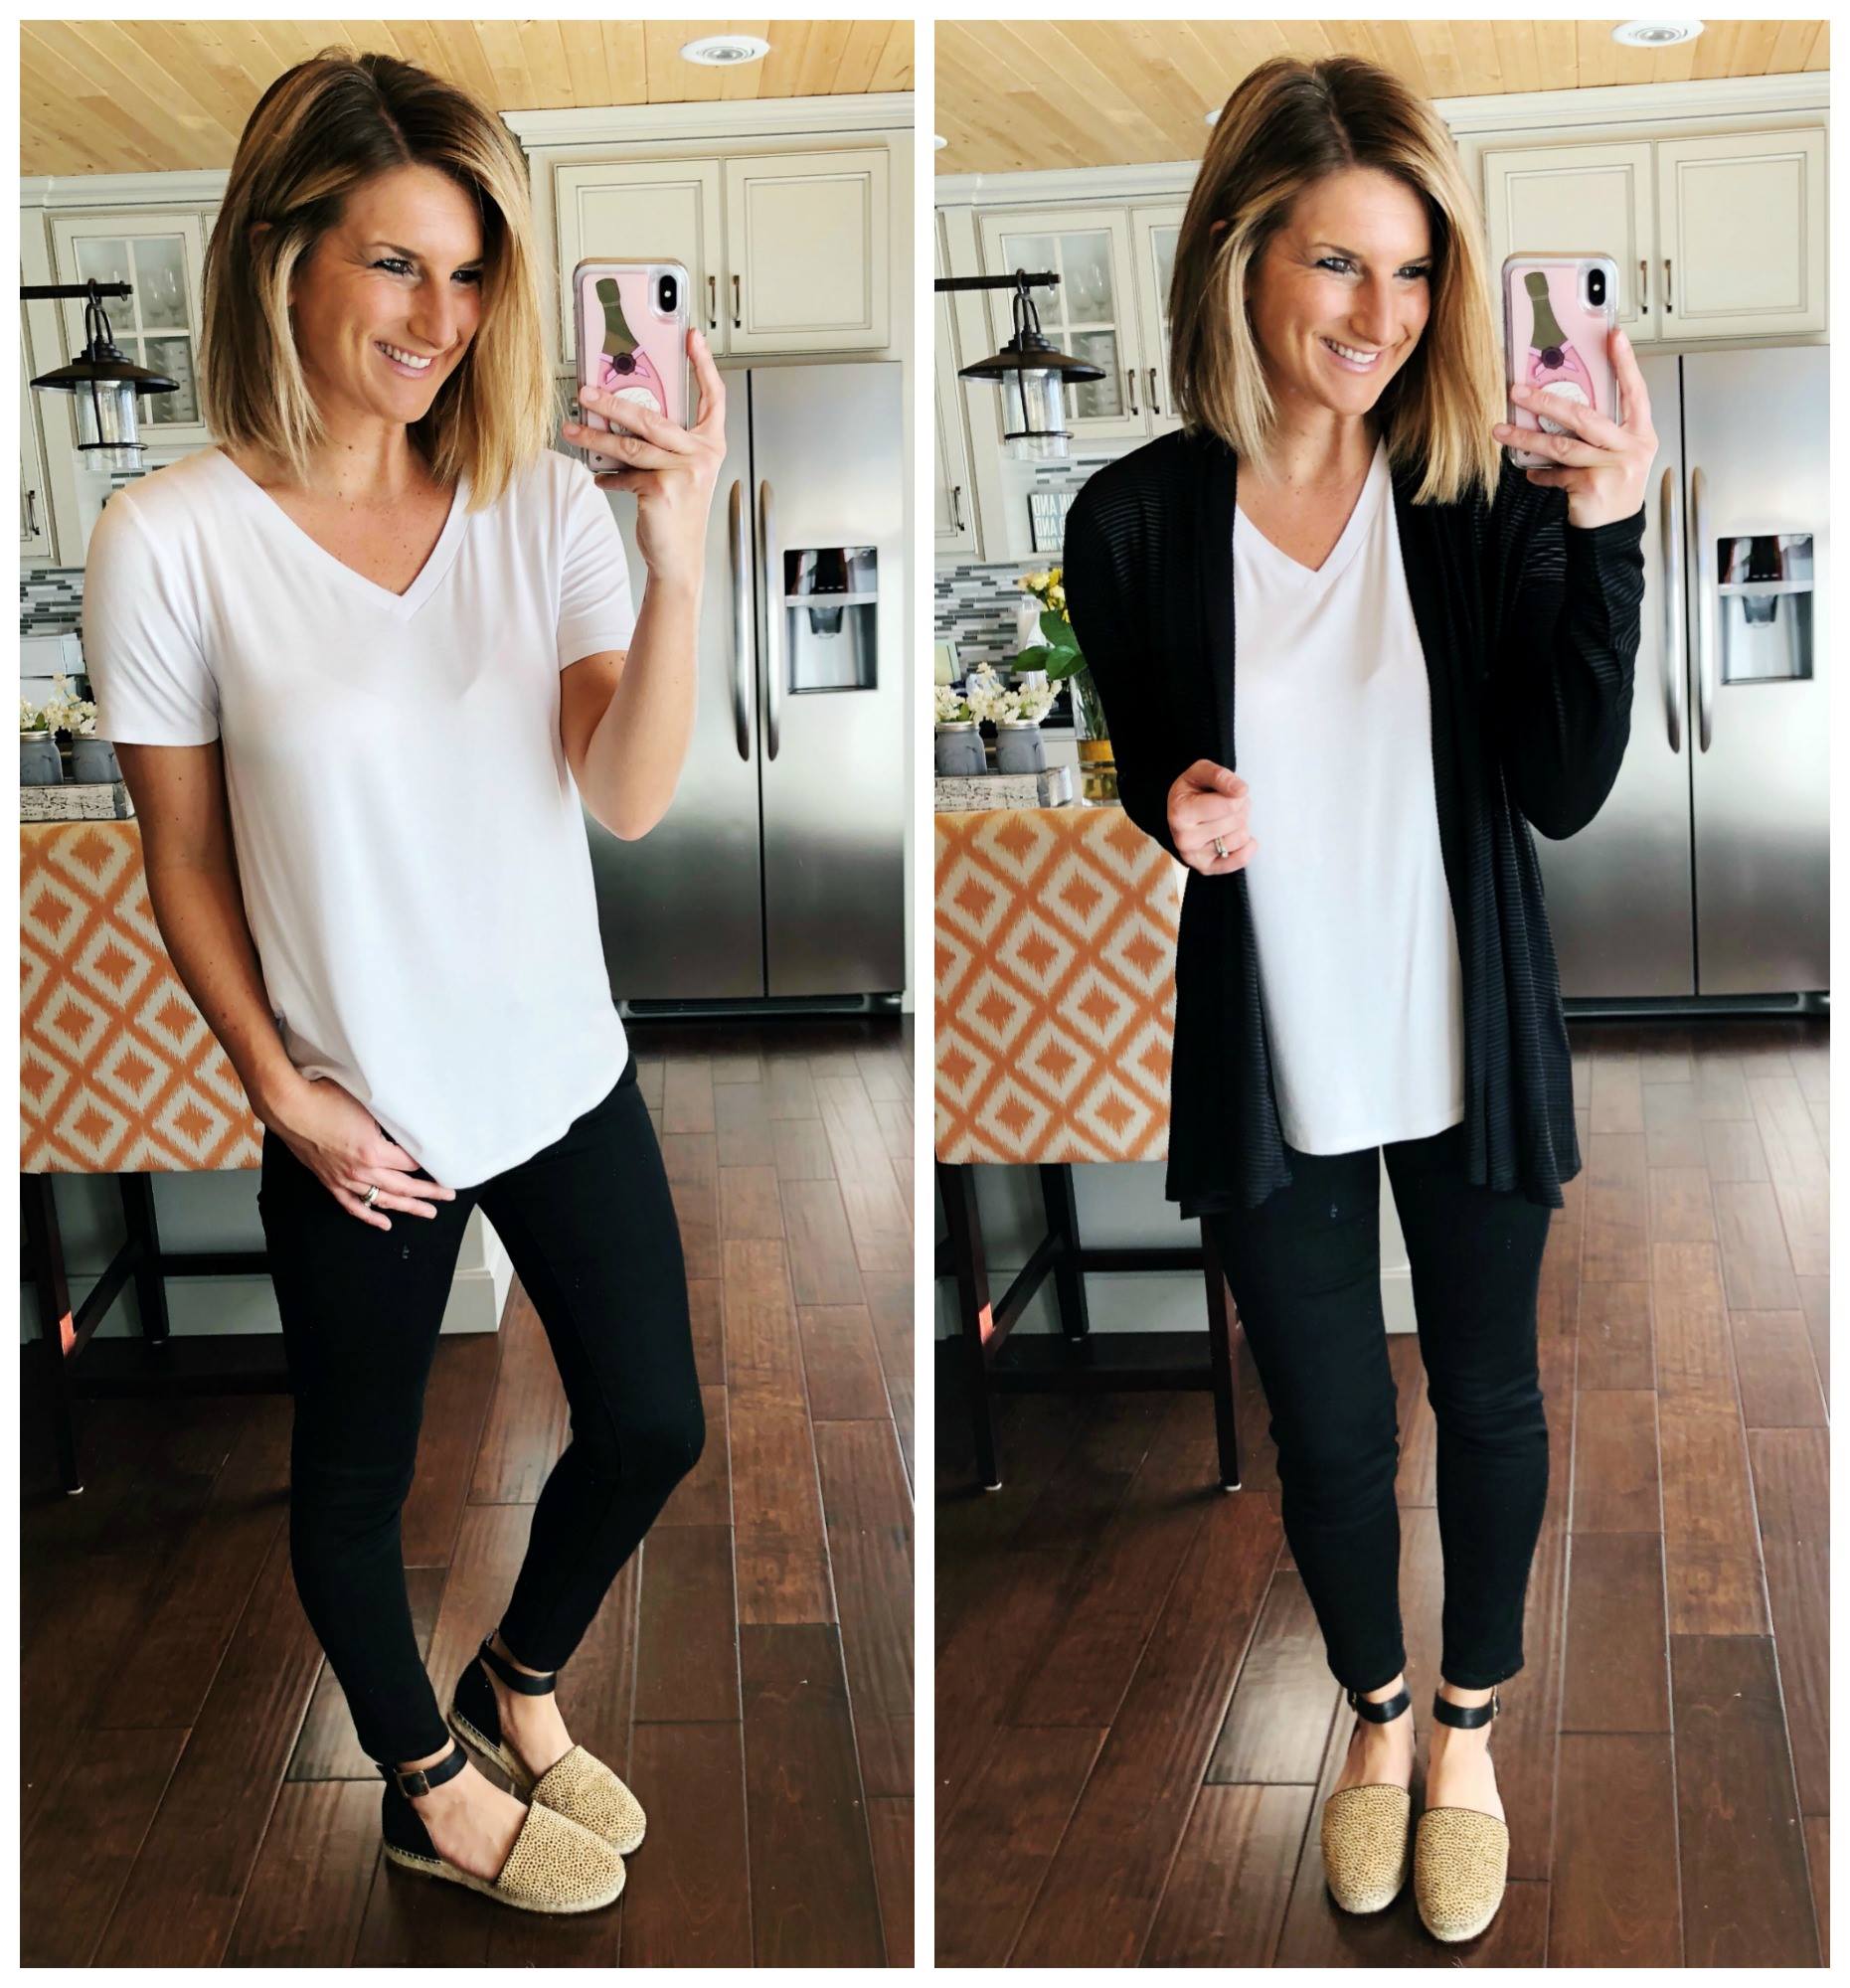 Spring Fashion // Perfect White Tee + Cropped Black Skinny Jeans + Lightweight Cardigan + Statement Flat Espadrilles // Black + White Outfit // Statement Shoes